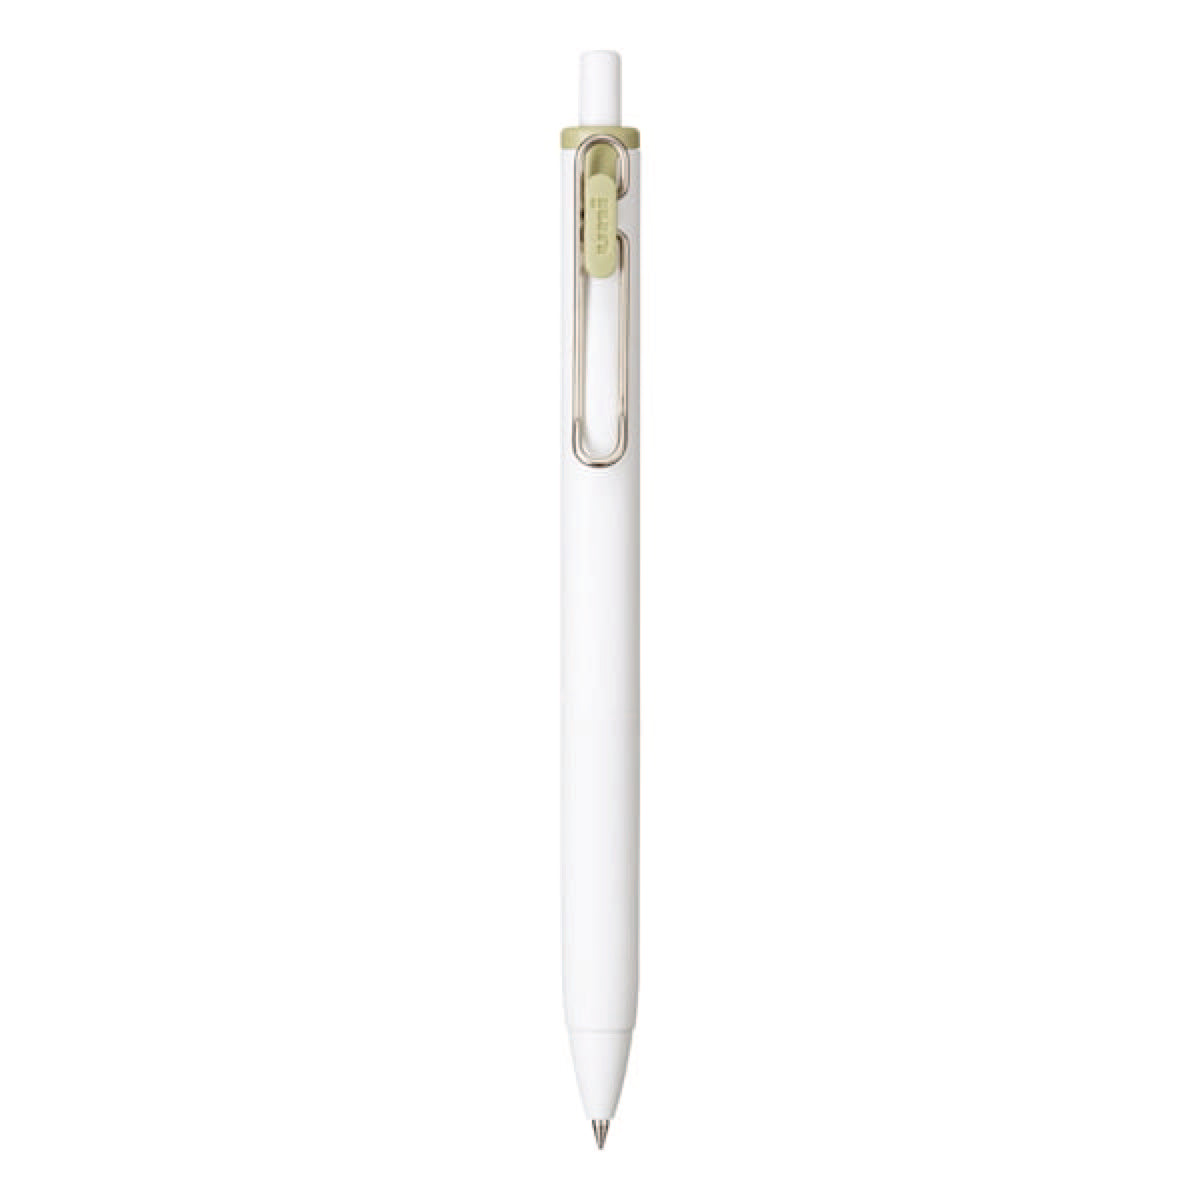 Single Olive Green pen with white barrel and clip in green to match the pen ink color